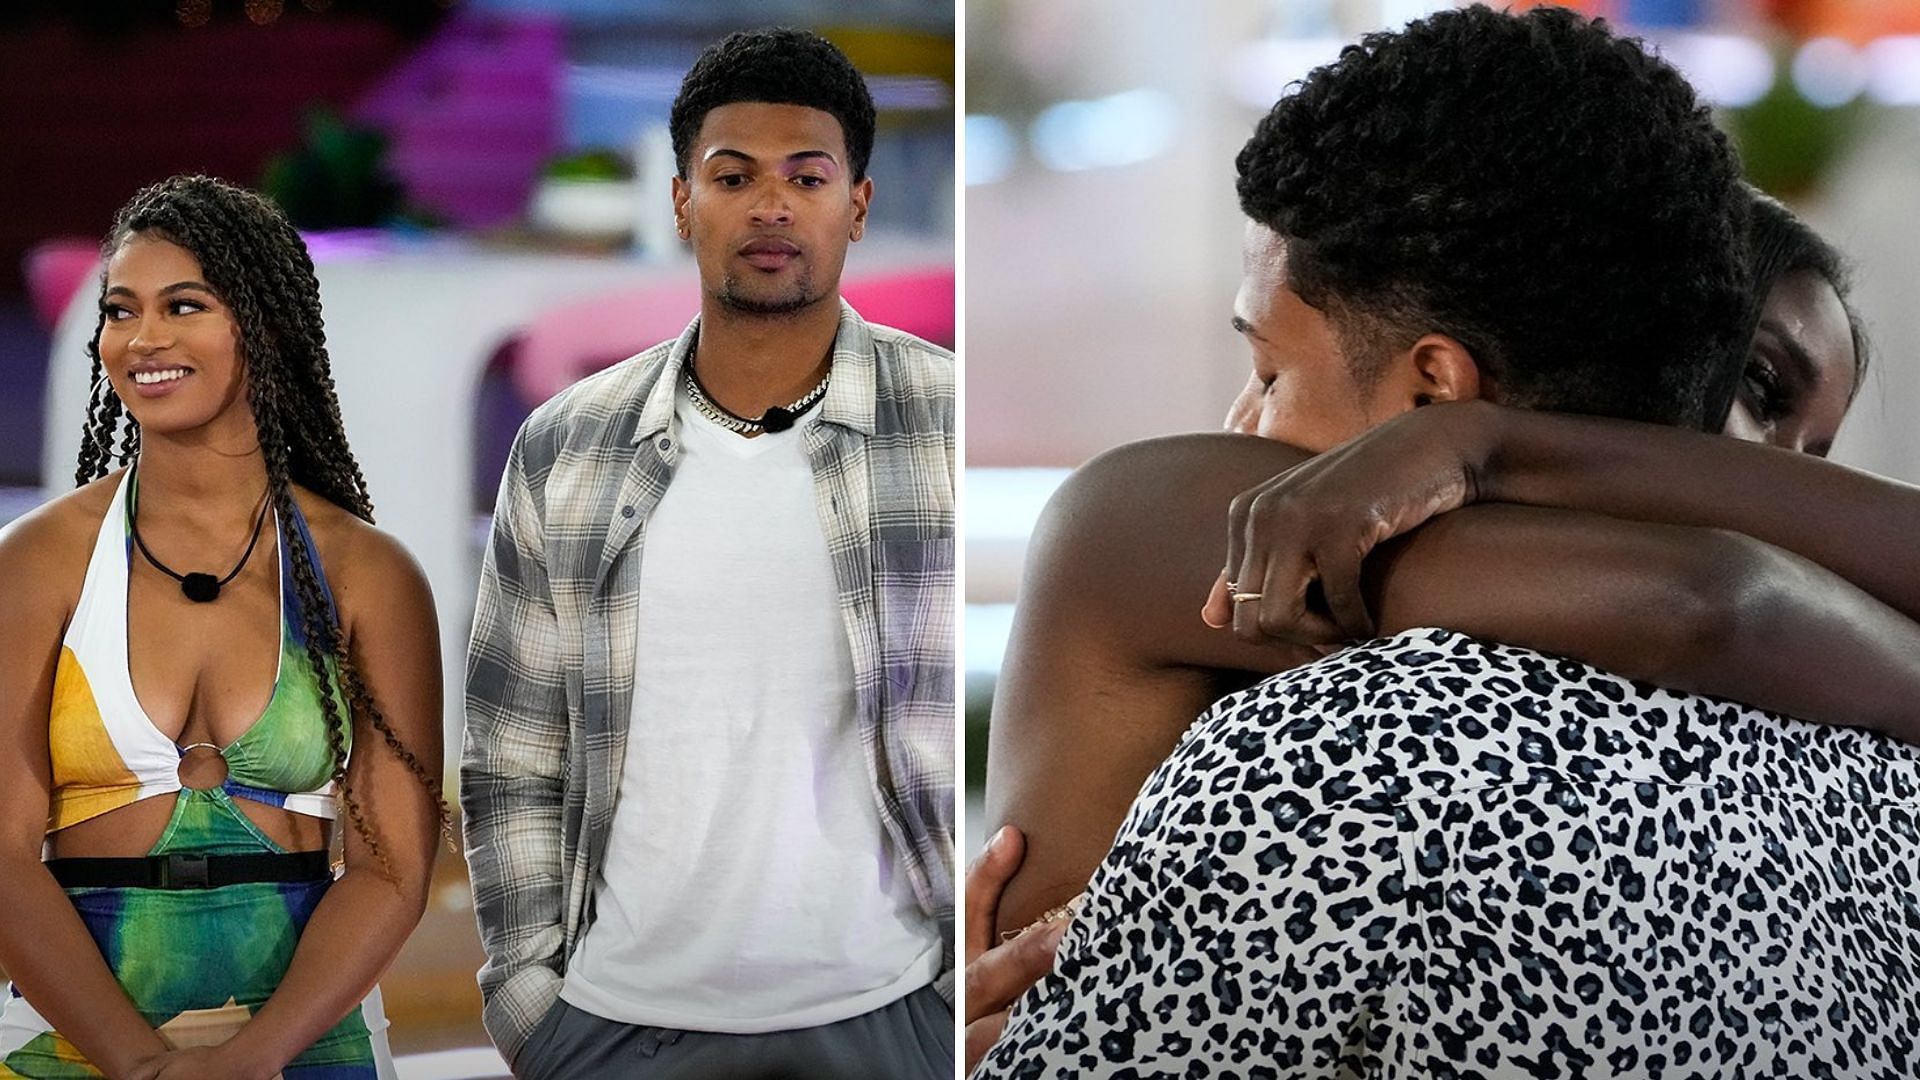 Fans split over Timmy recoupling with Bria after his strong connection with Zeta (Image via loveislandusa/Instagram,@loveislandusa/Twitter)